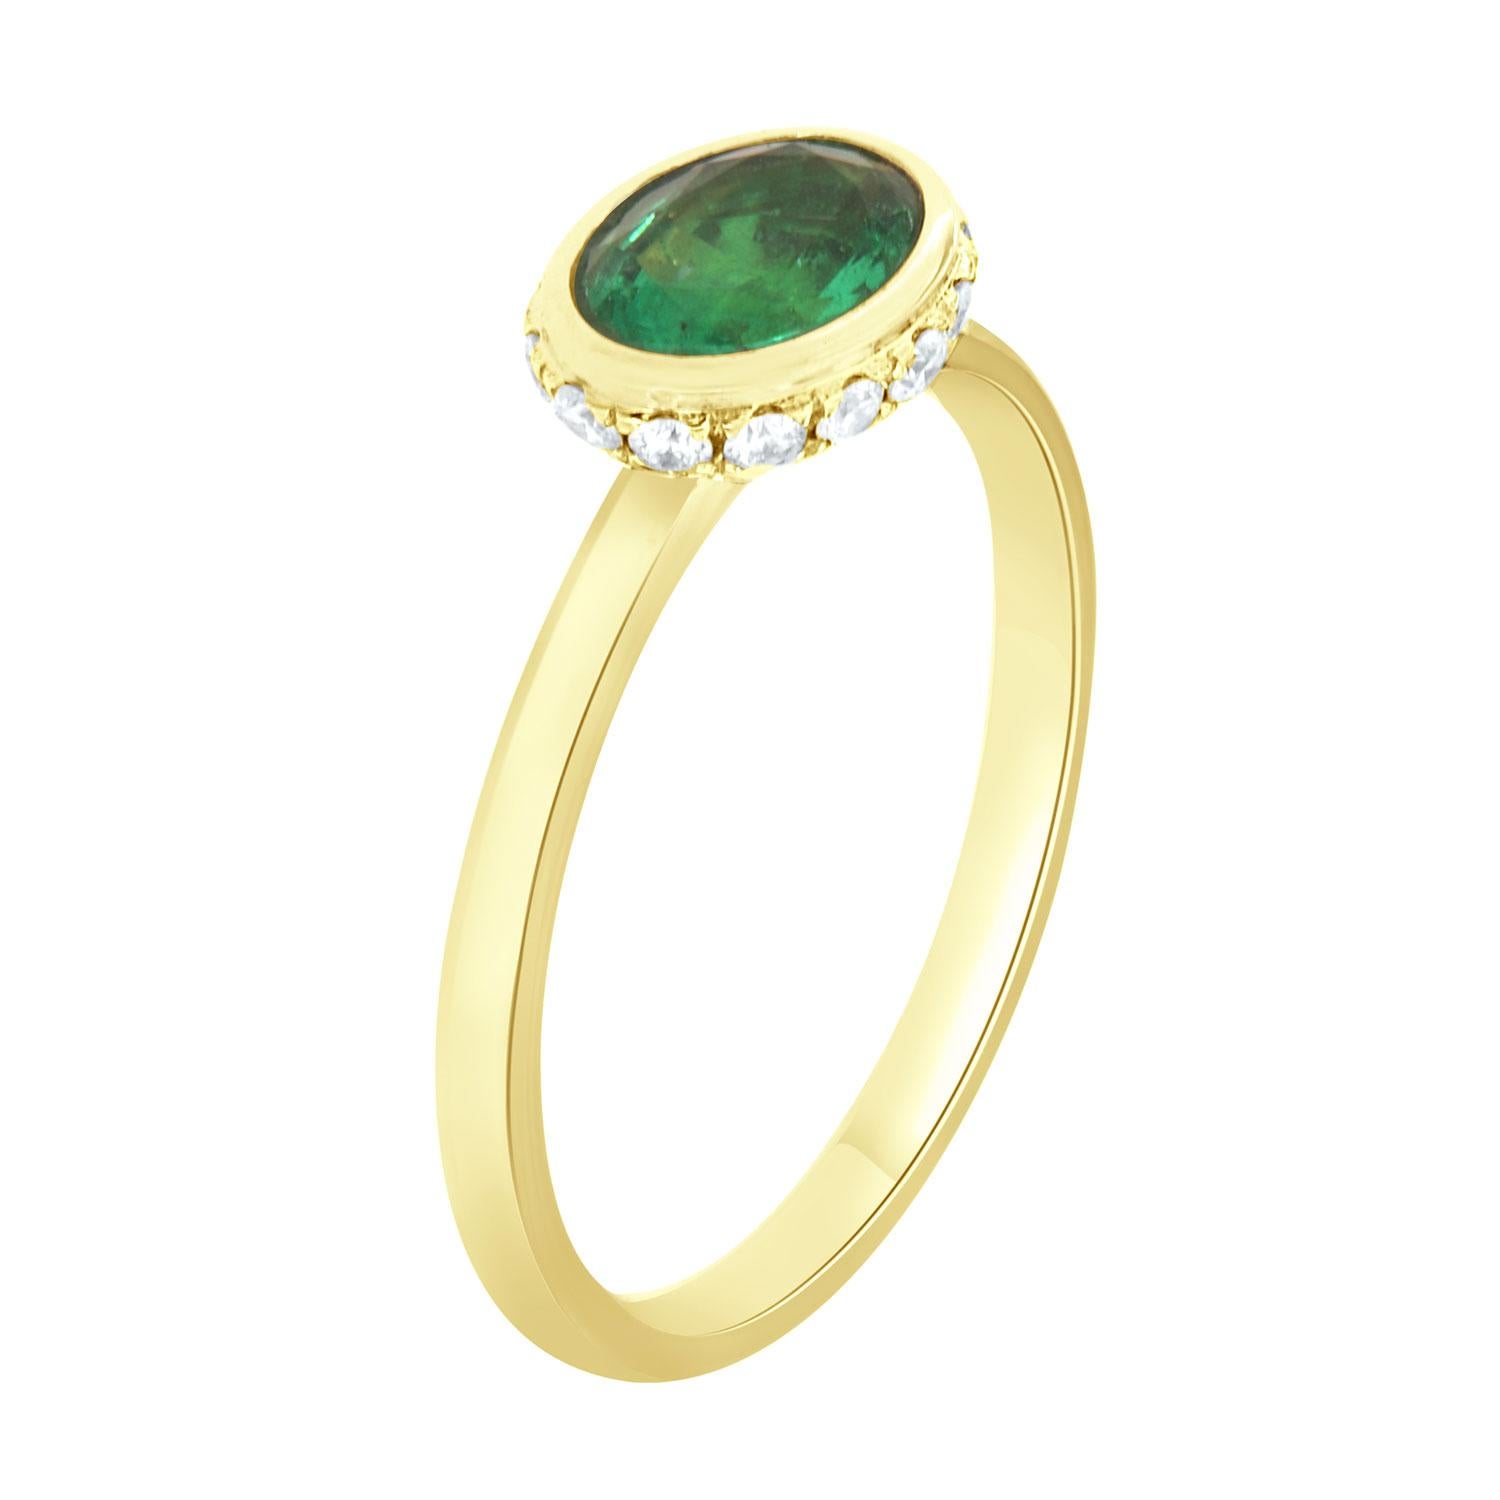 This 14k White gold delicate ring features a 0.78 Carat vibrant green oval shape emerald bezel set East-West style. Sixteen (16)Brilliant round diamonds are micro-prong set in a hidden halo on the crown to create the sparkle look every woman is